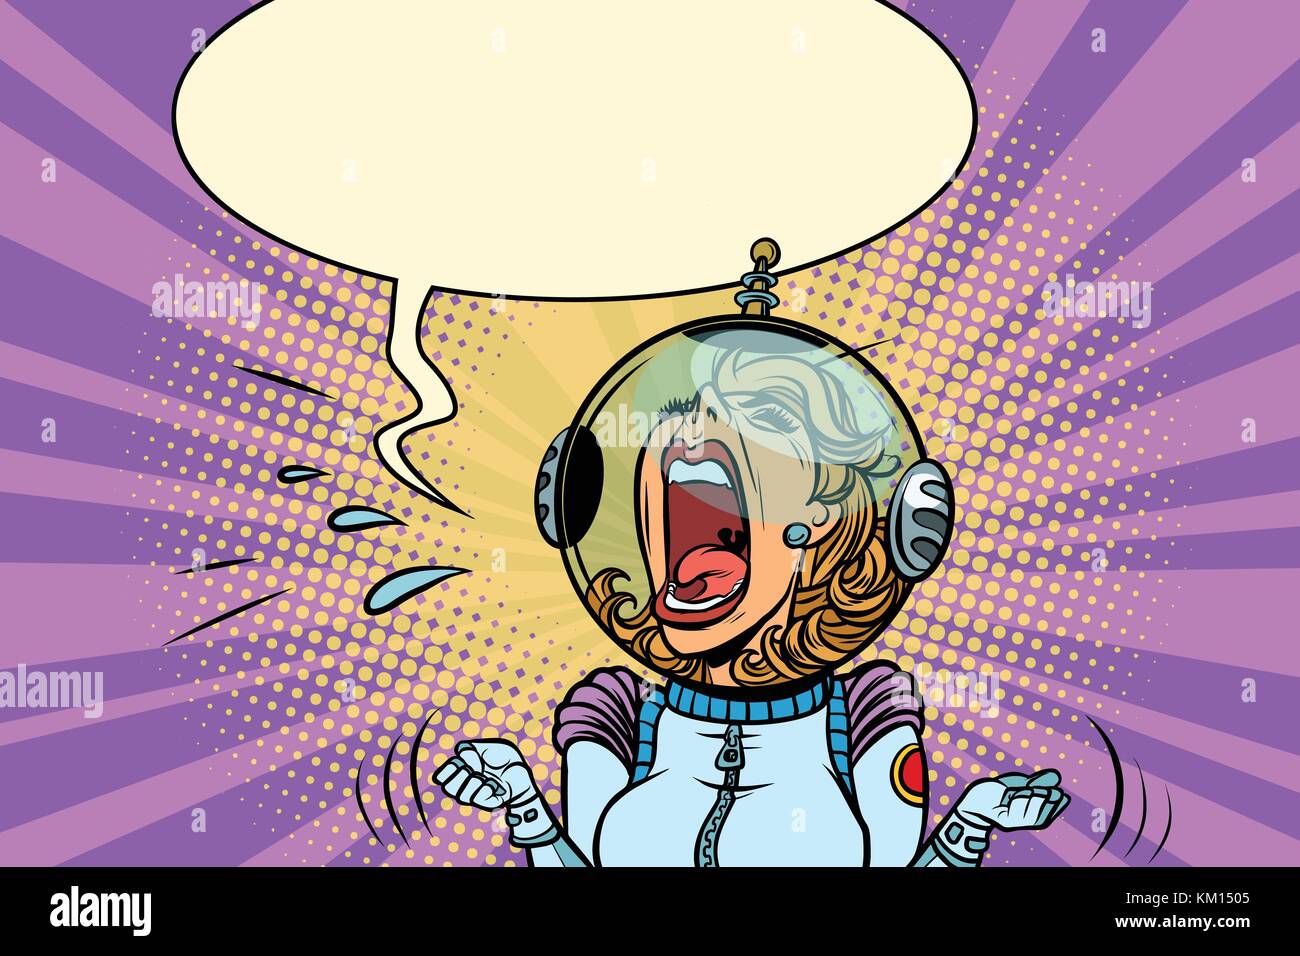 Funny angry woman astronaut Stock Vector